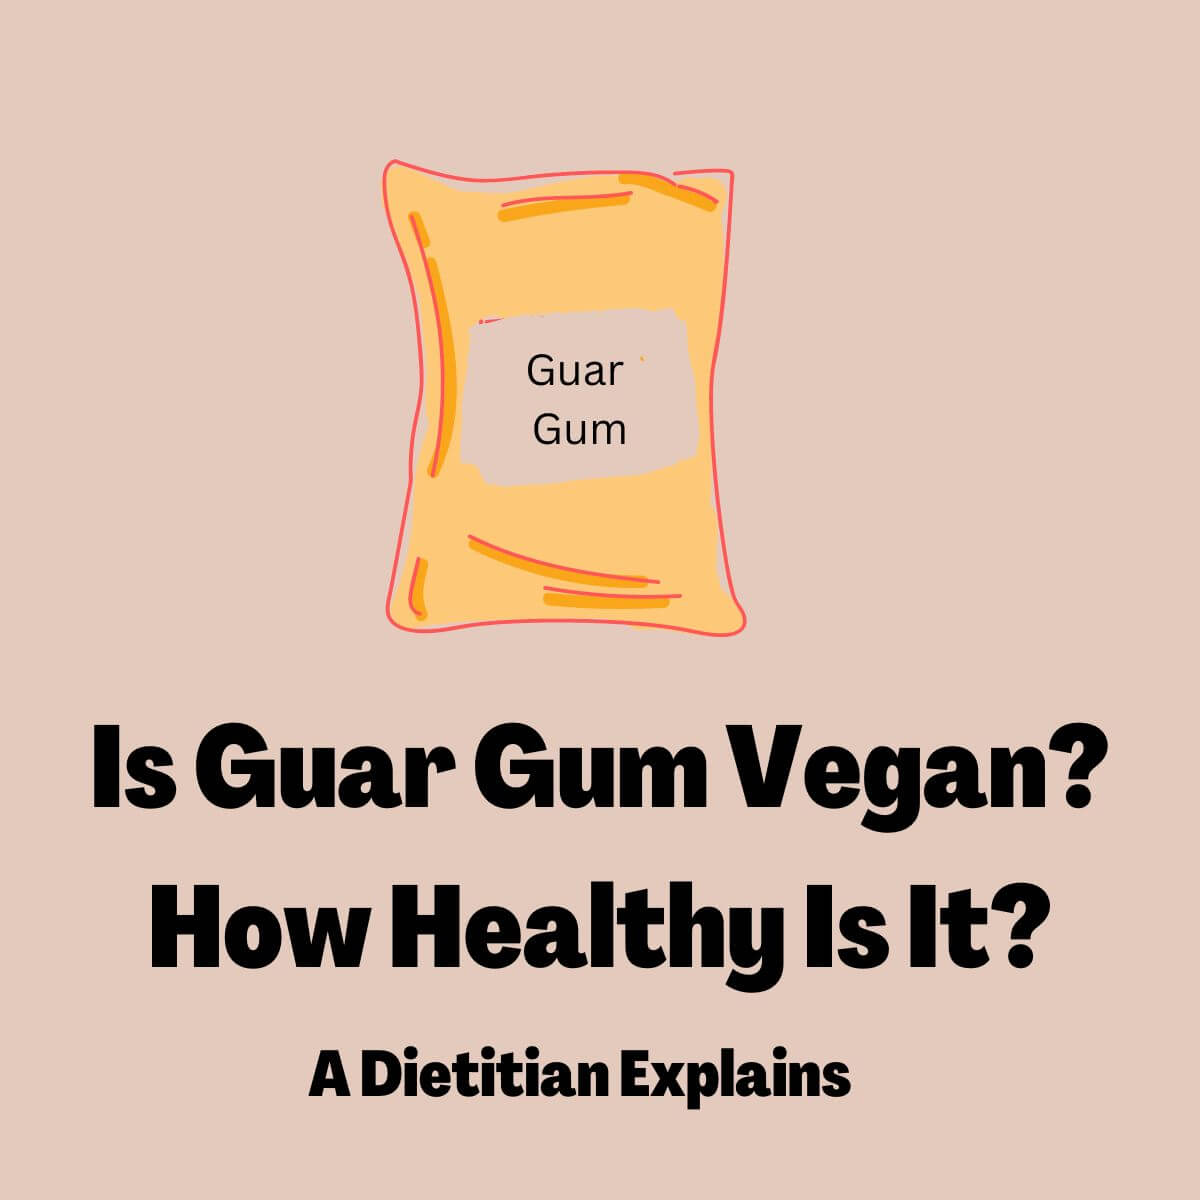 Picture of a sack with the words "Guar Gum" on it. Title reads: Is Guar Gum Vegan? How Healthy Is it? A Dietitian Explains.